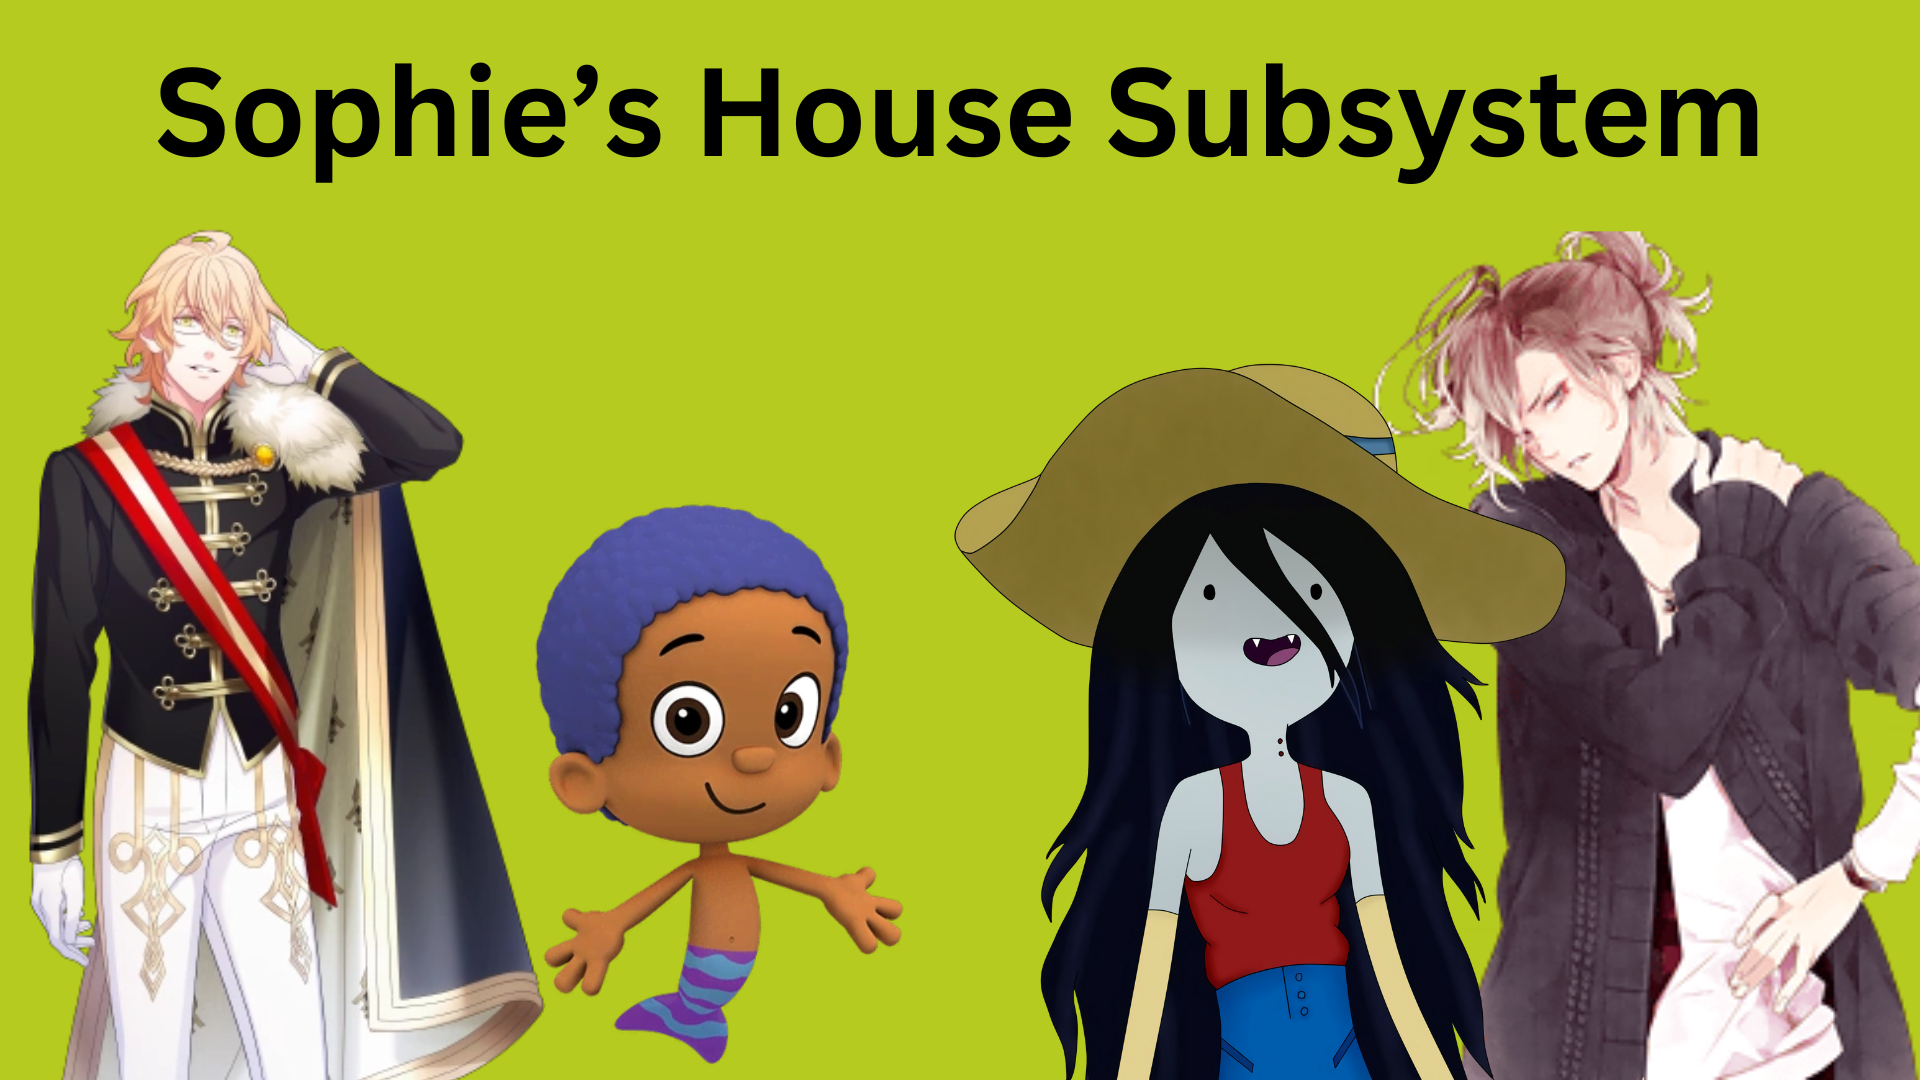 Sophie's House Subsystem